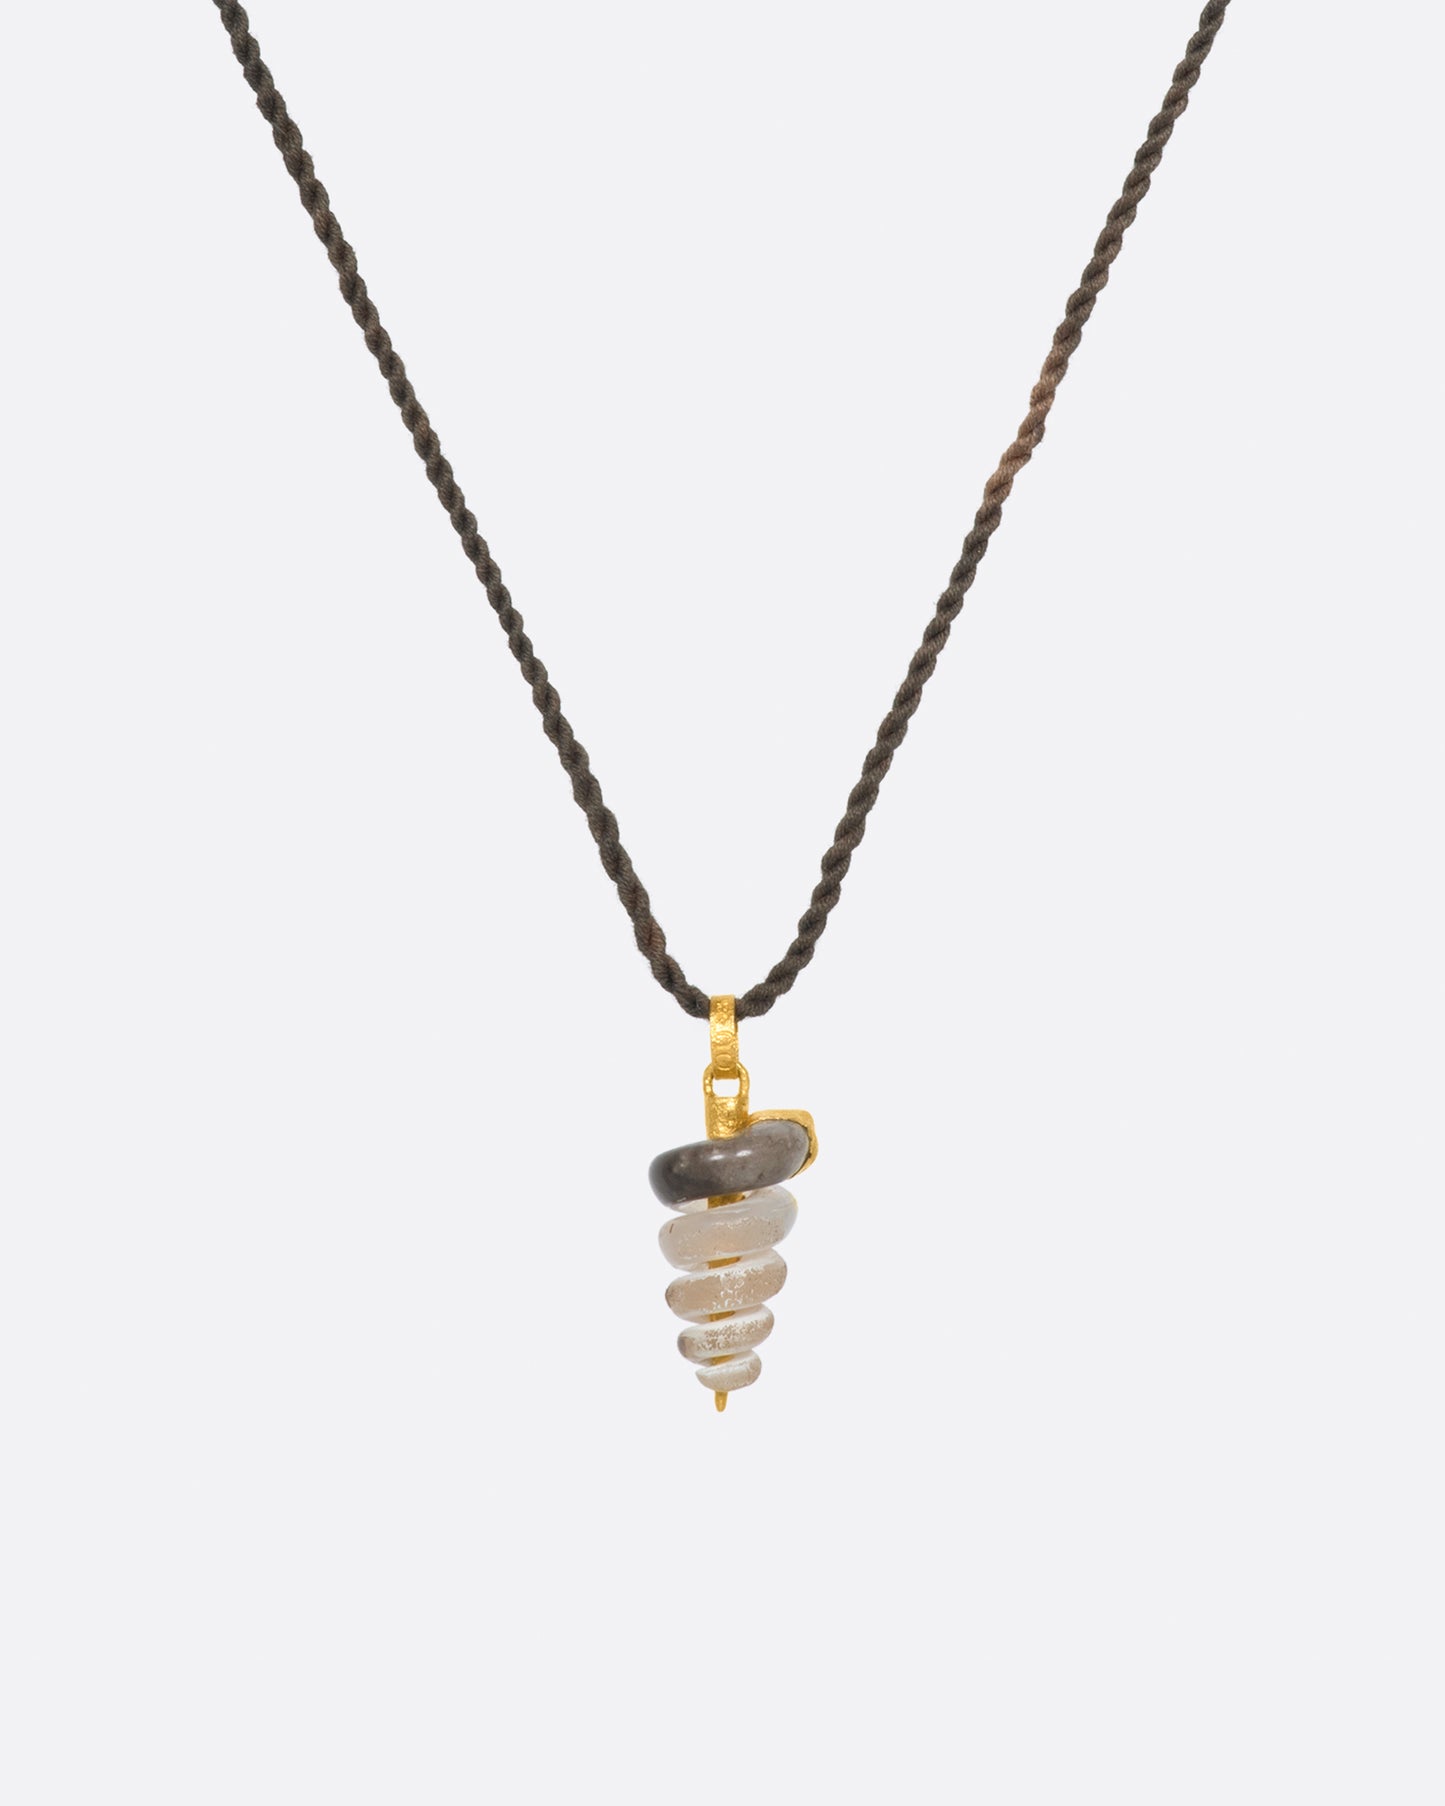 A fossilized snail pendant with gold winding its way down the inside